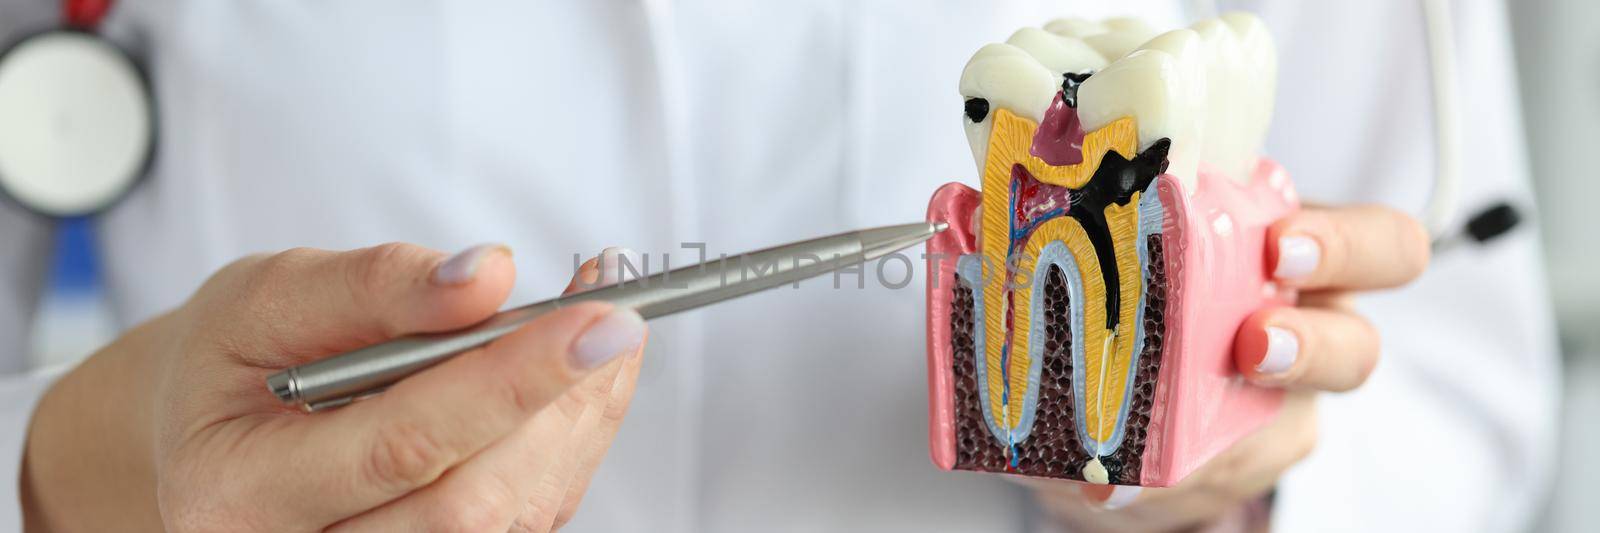 Doctor showing carious cavity with ballpoint pen on plastic artificial tooth model closeup. Dental care concept